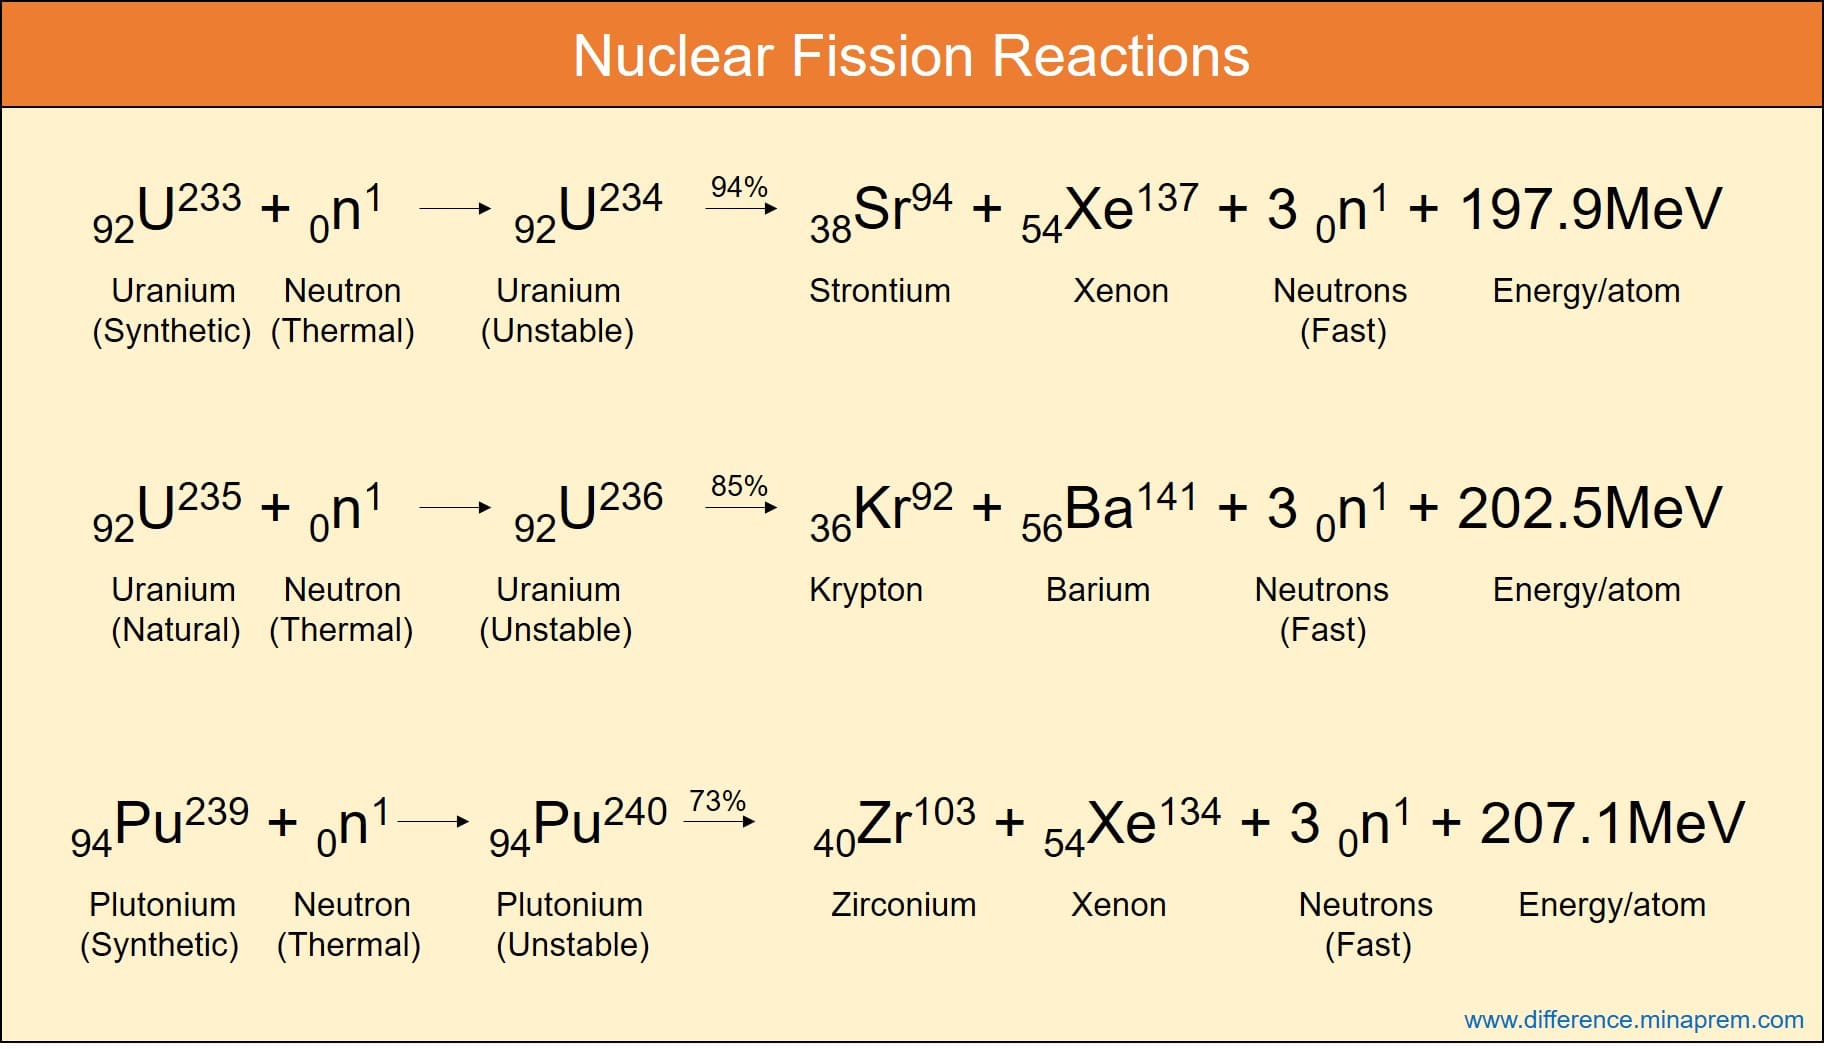 which change occurs during a nuclear fission reaction